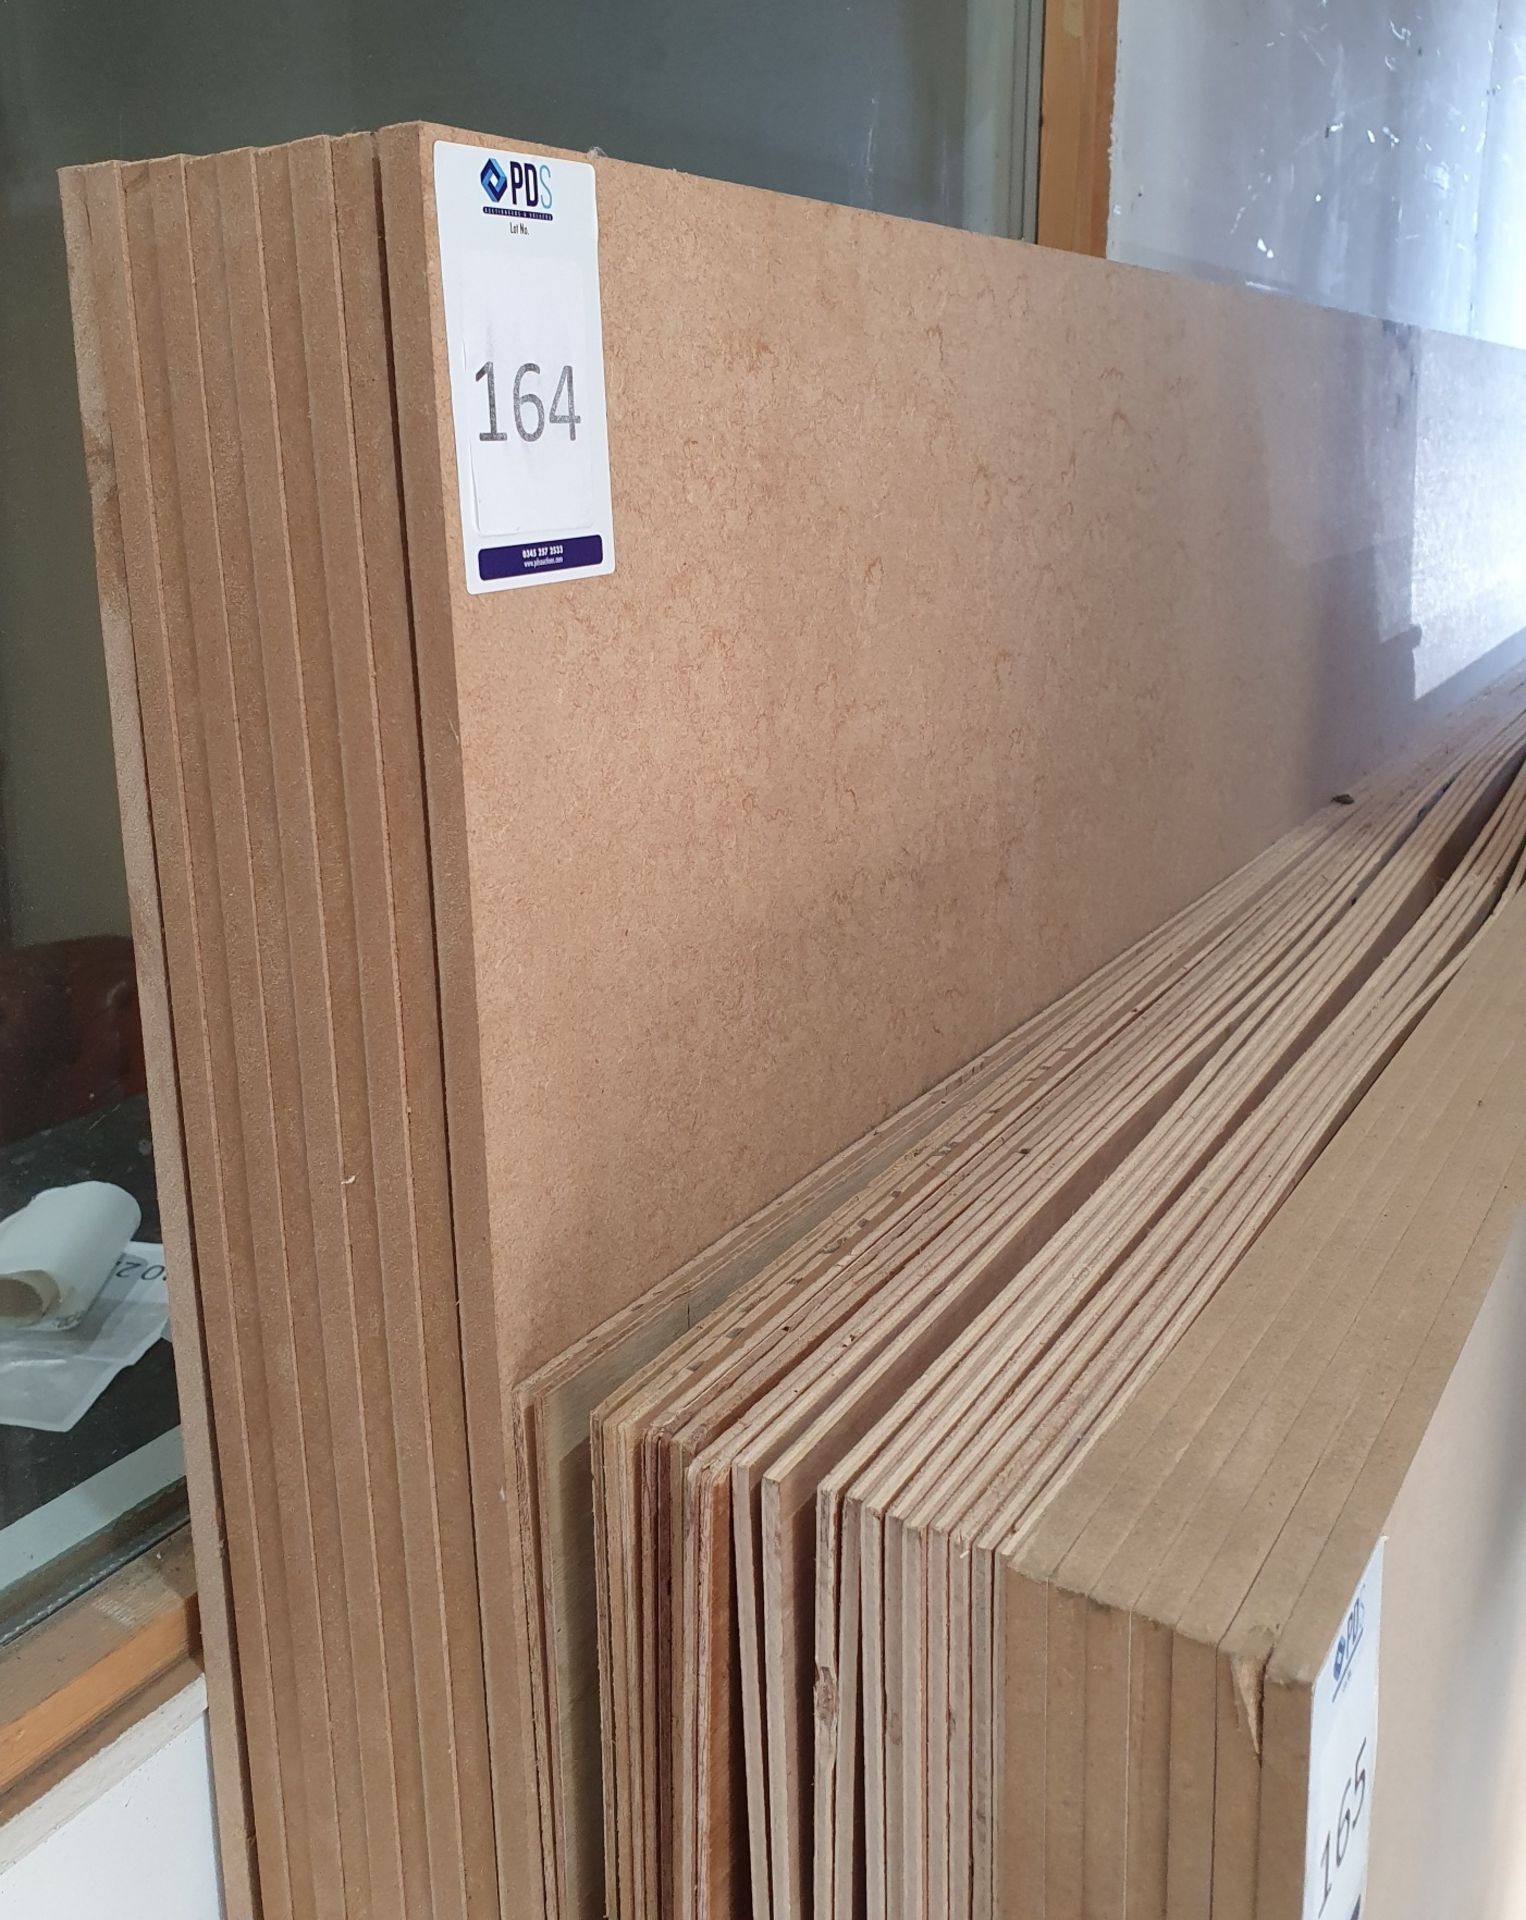 10 Sheets of MDF Board. Approximately 310cm x 150cm x 1.25cm (Located Bicester, See General Notes